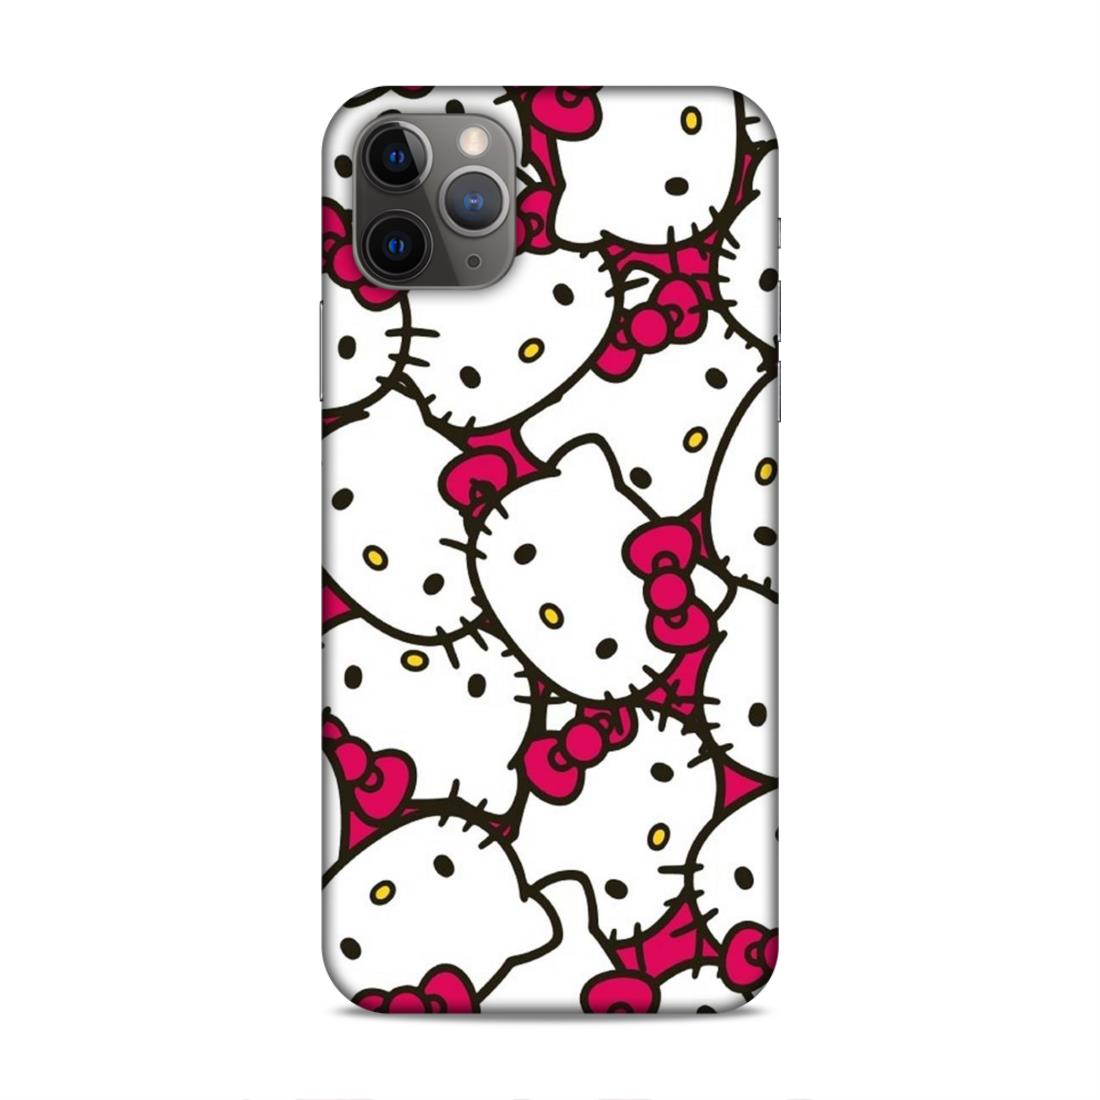 Kitty Hard Back Case For Apple iPhone 11 Pro Max